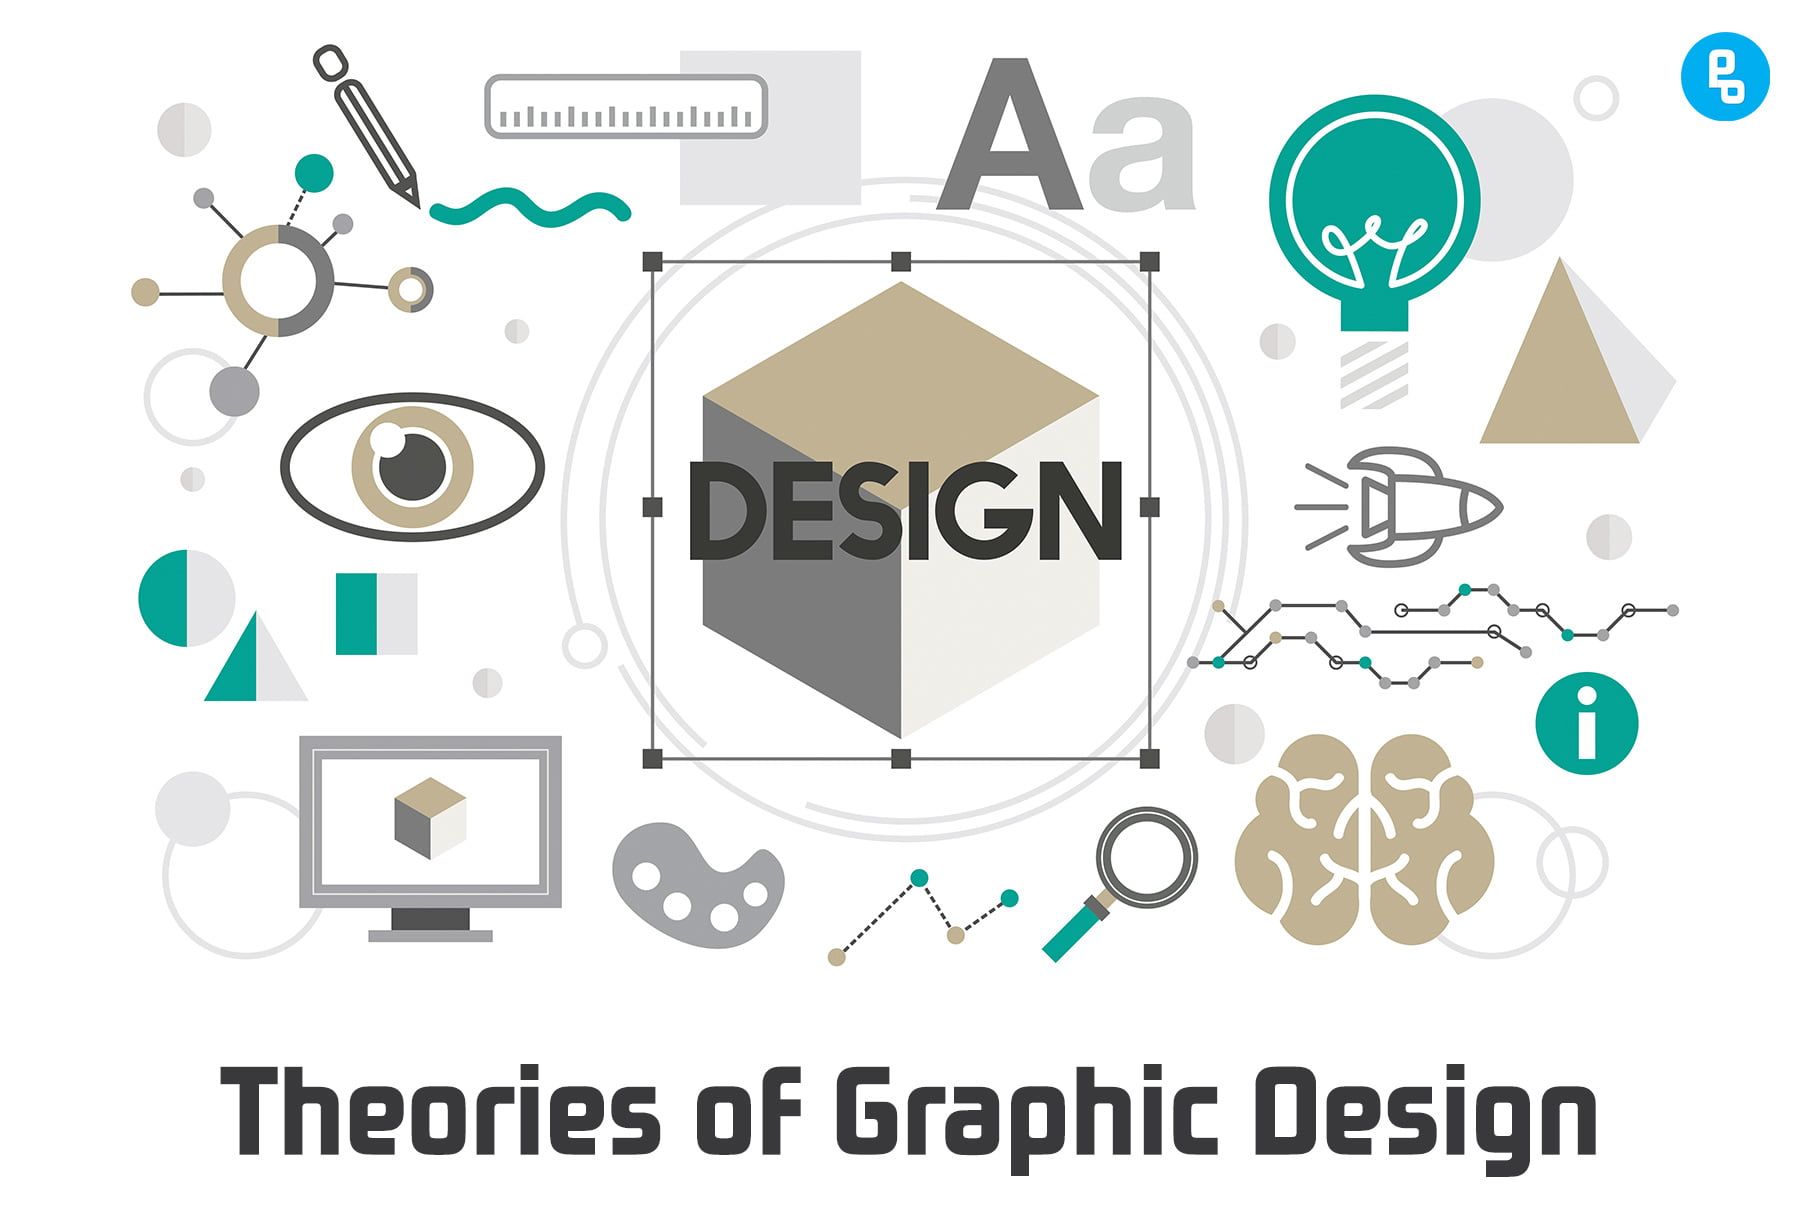 Graphic design is an important part of any culture because it helps us to access the information we need such as product information or text messages from our friends and family.